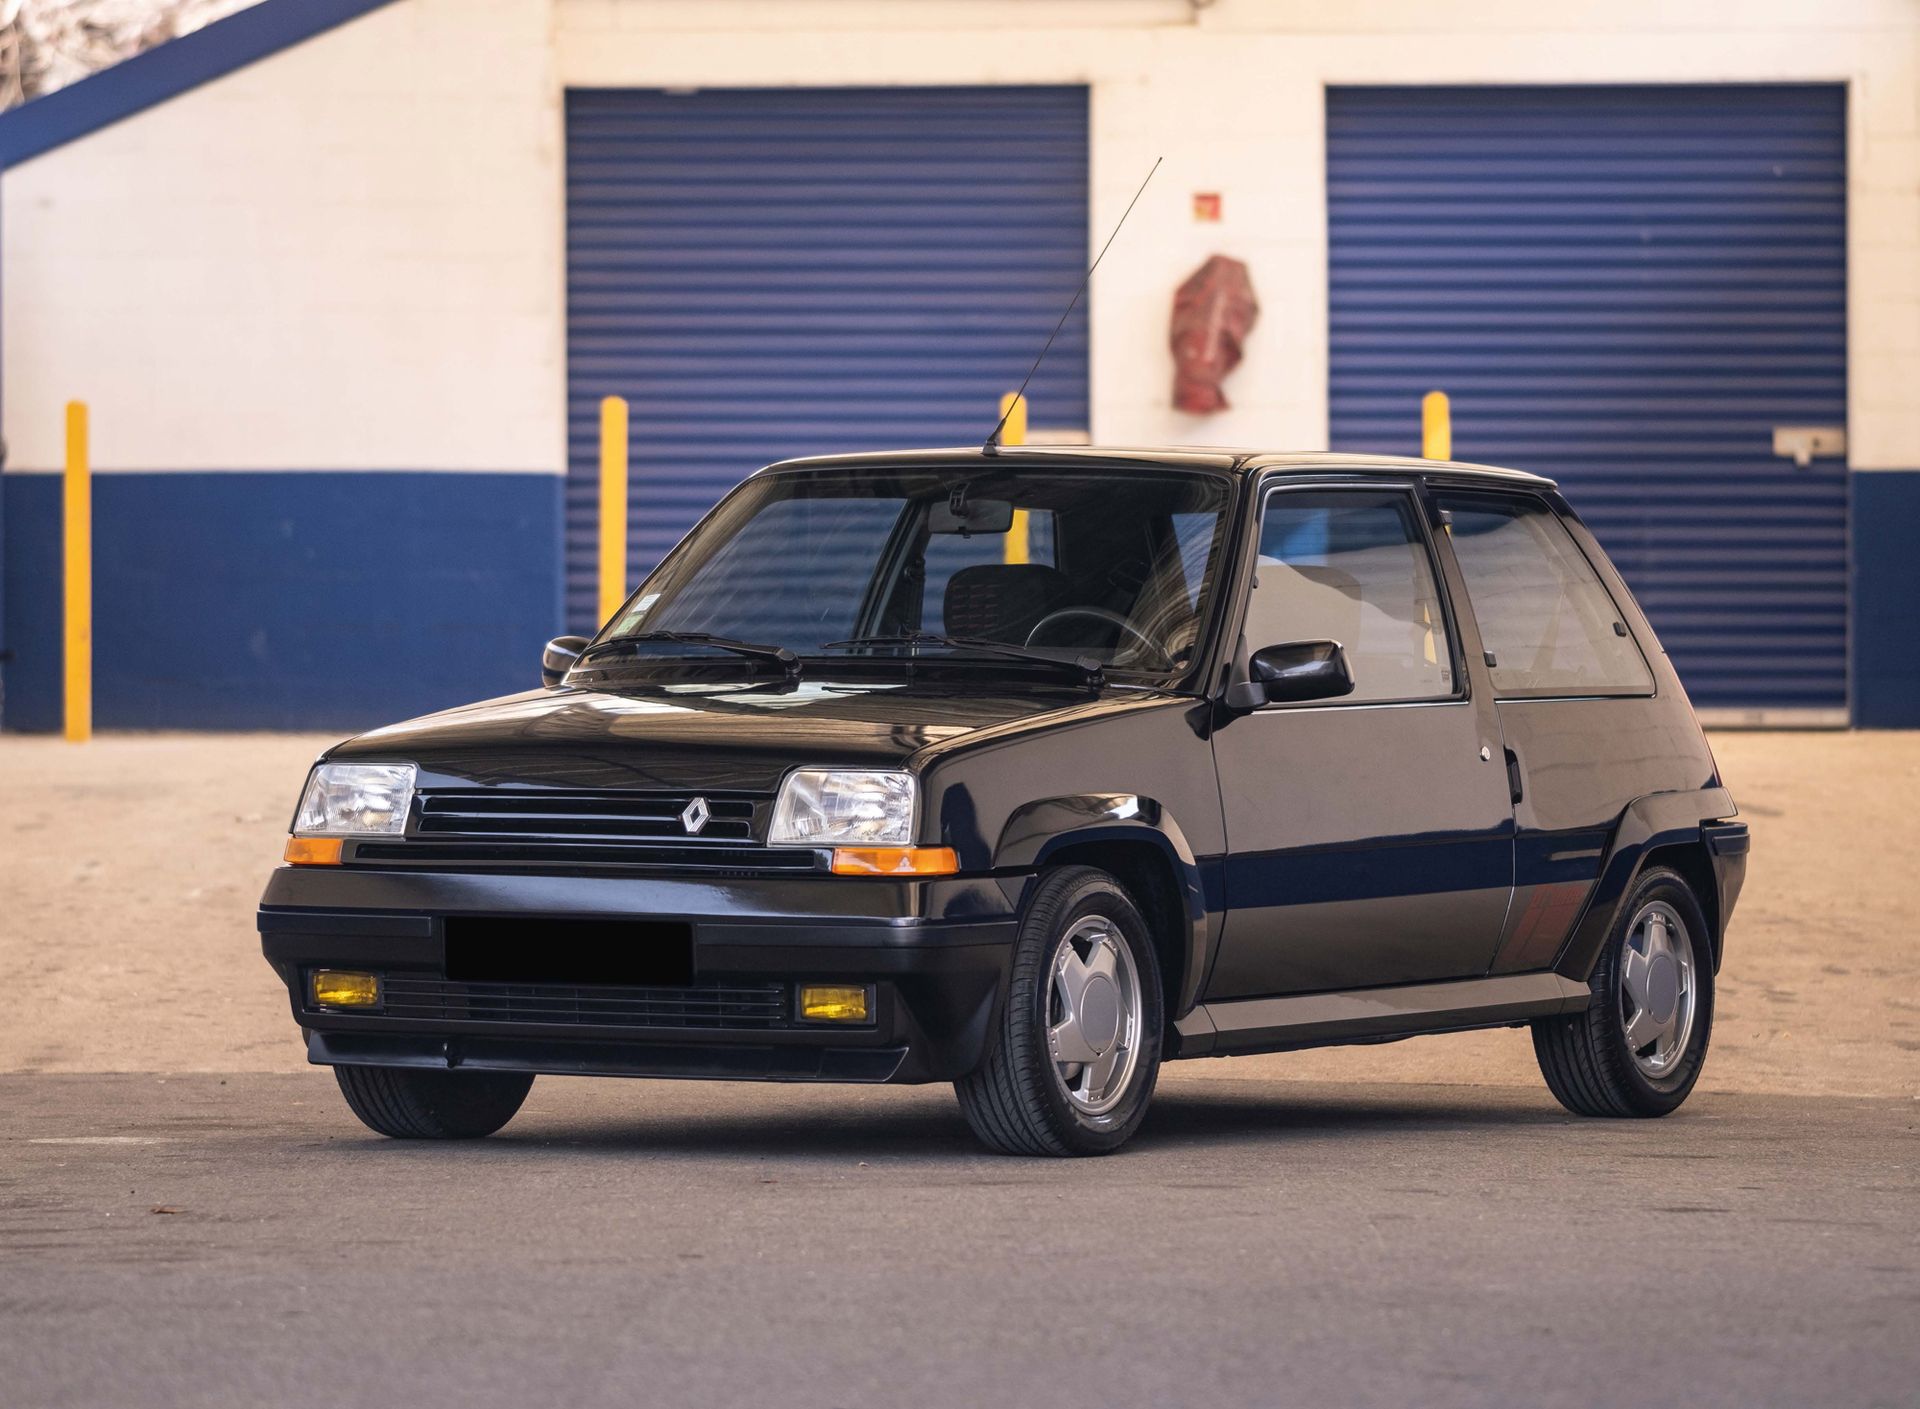 Renault Supercinq, GT Turbo 1989 French historic registration title

At a time w&hellip;